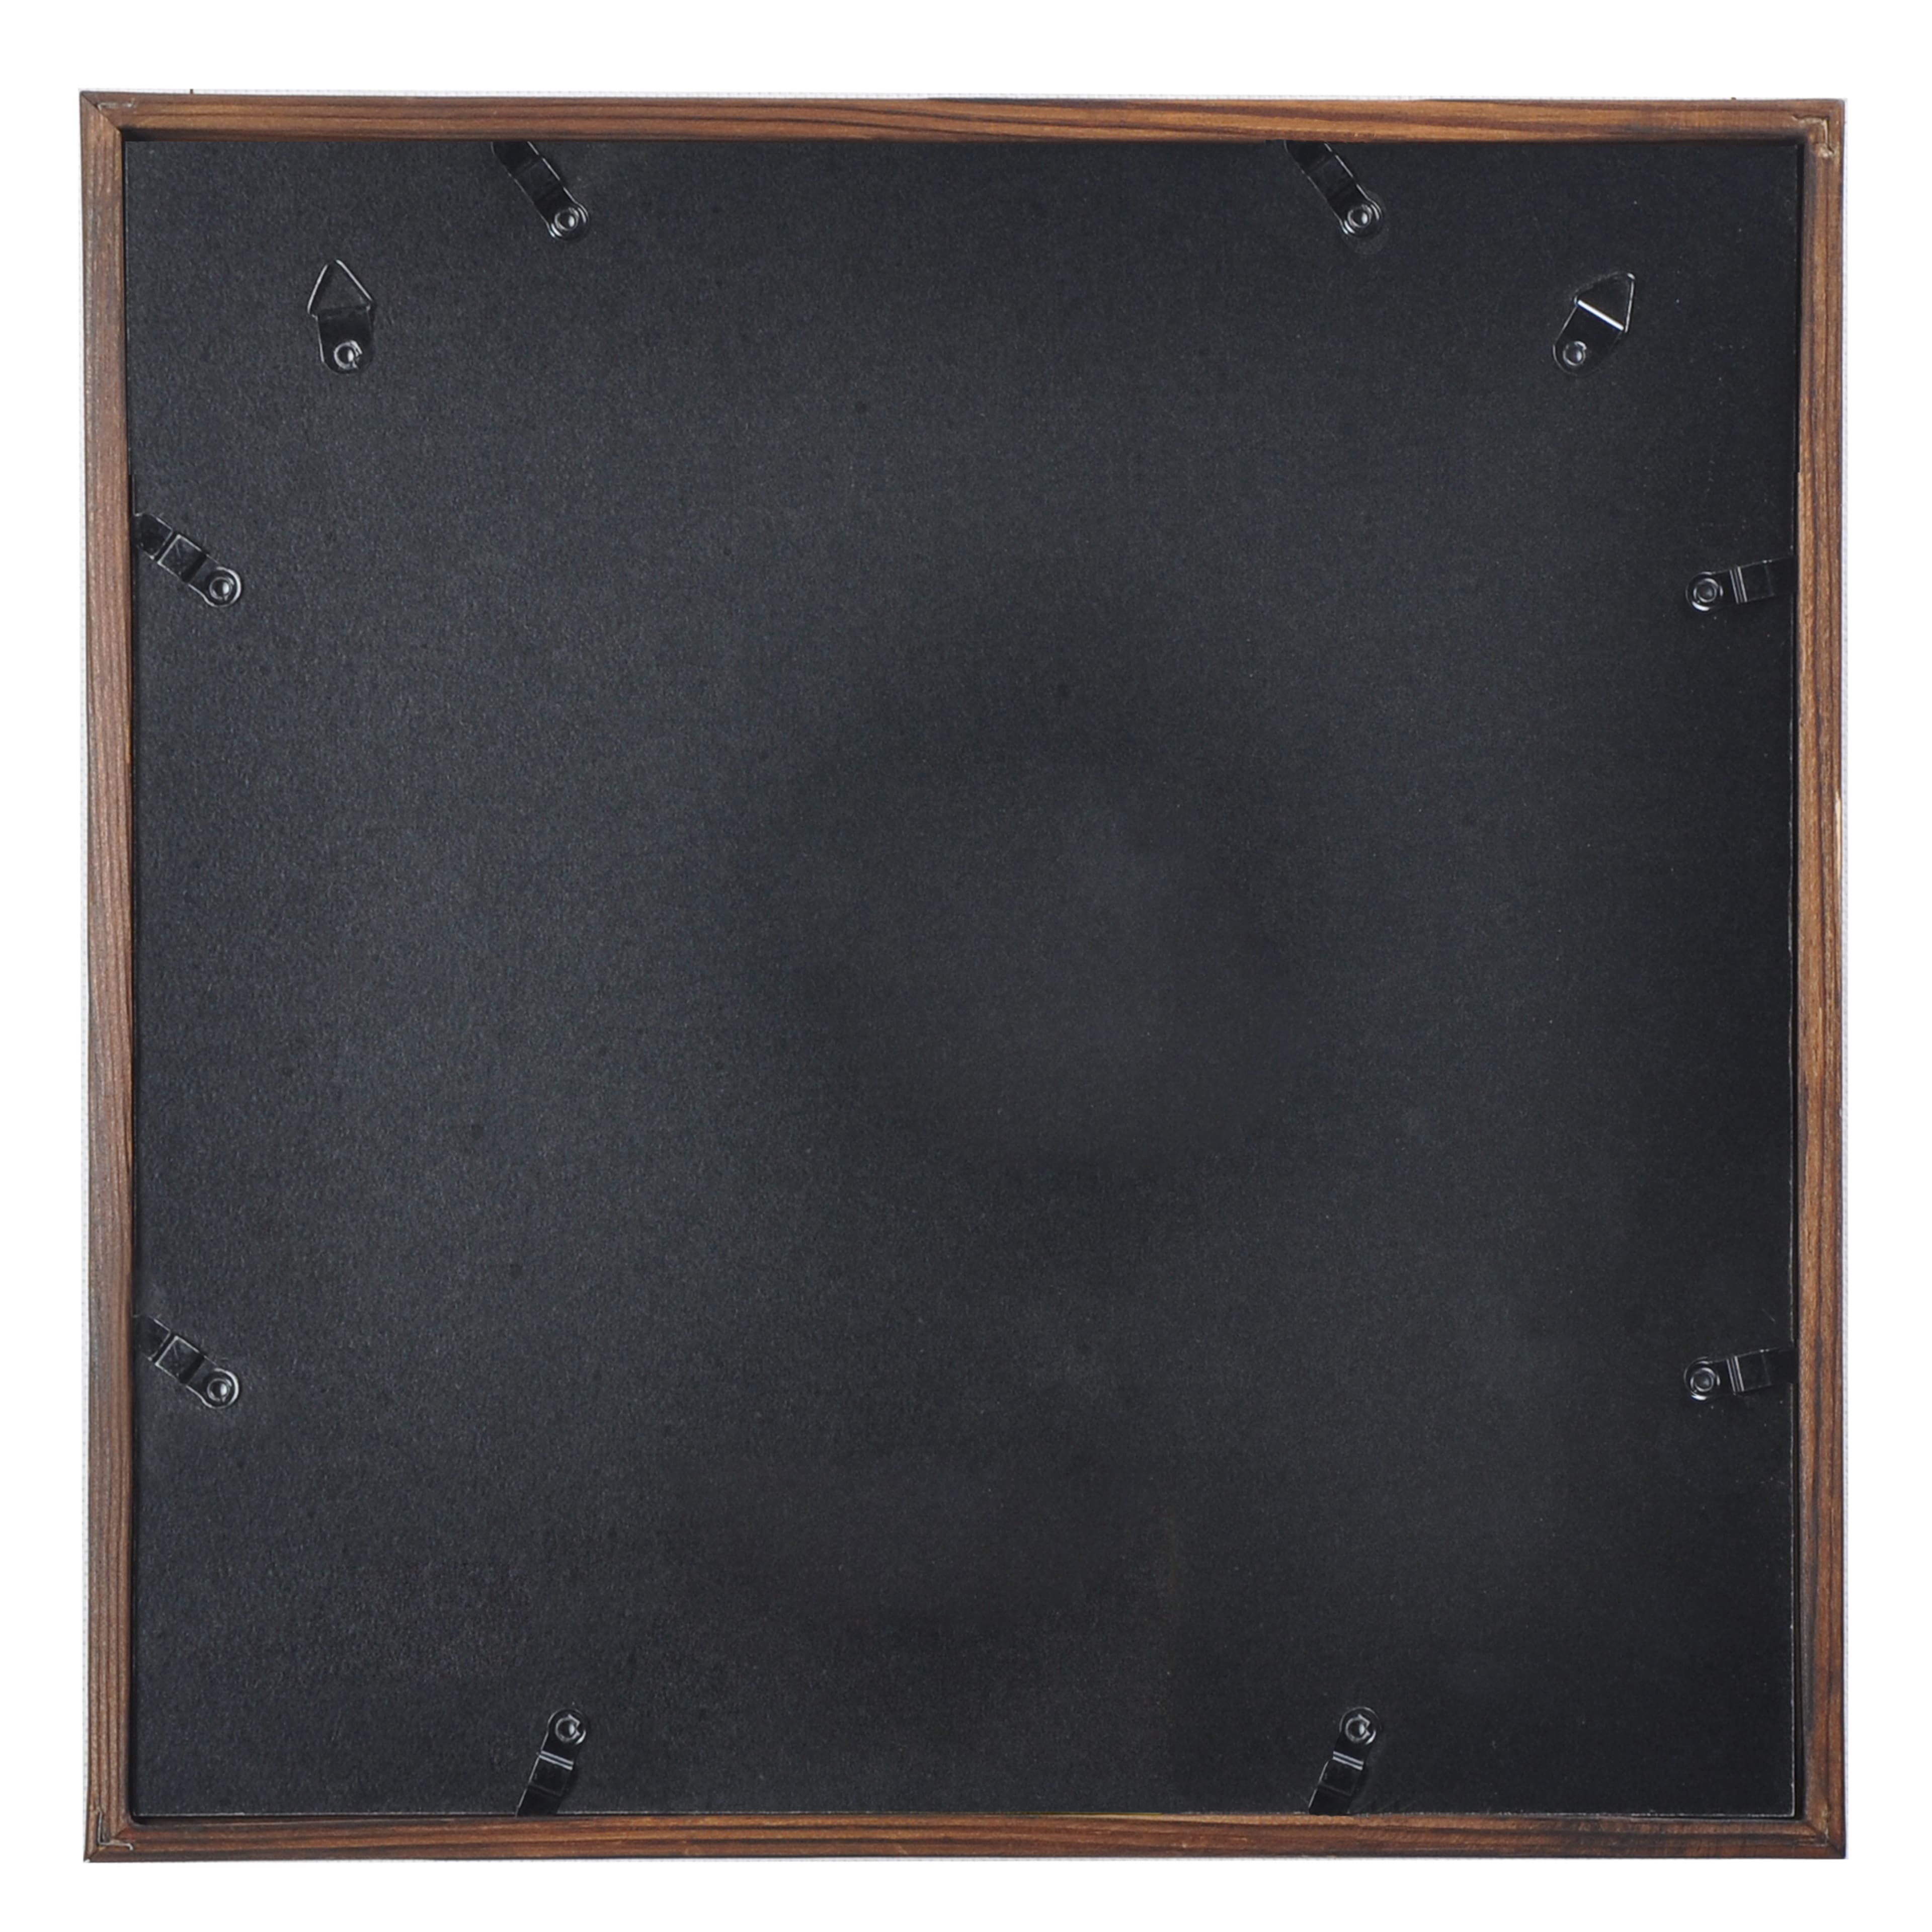 Dark Wood Frame with Mat, Gallery by Studio D&#xE9;cor&#xAE;